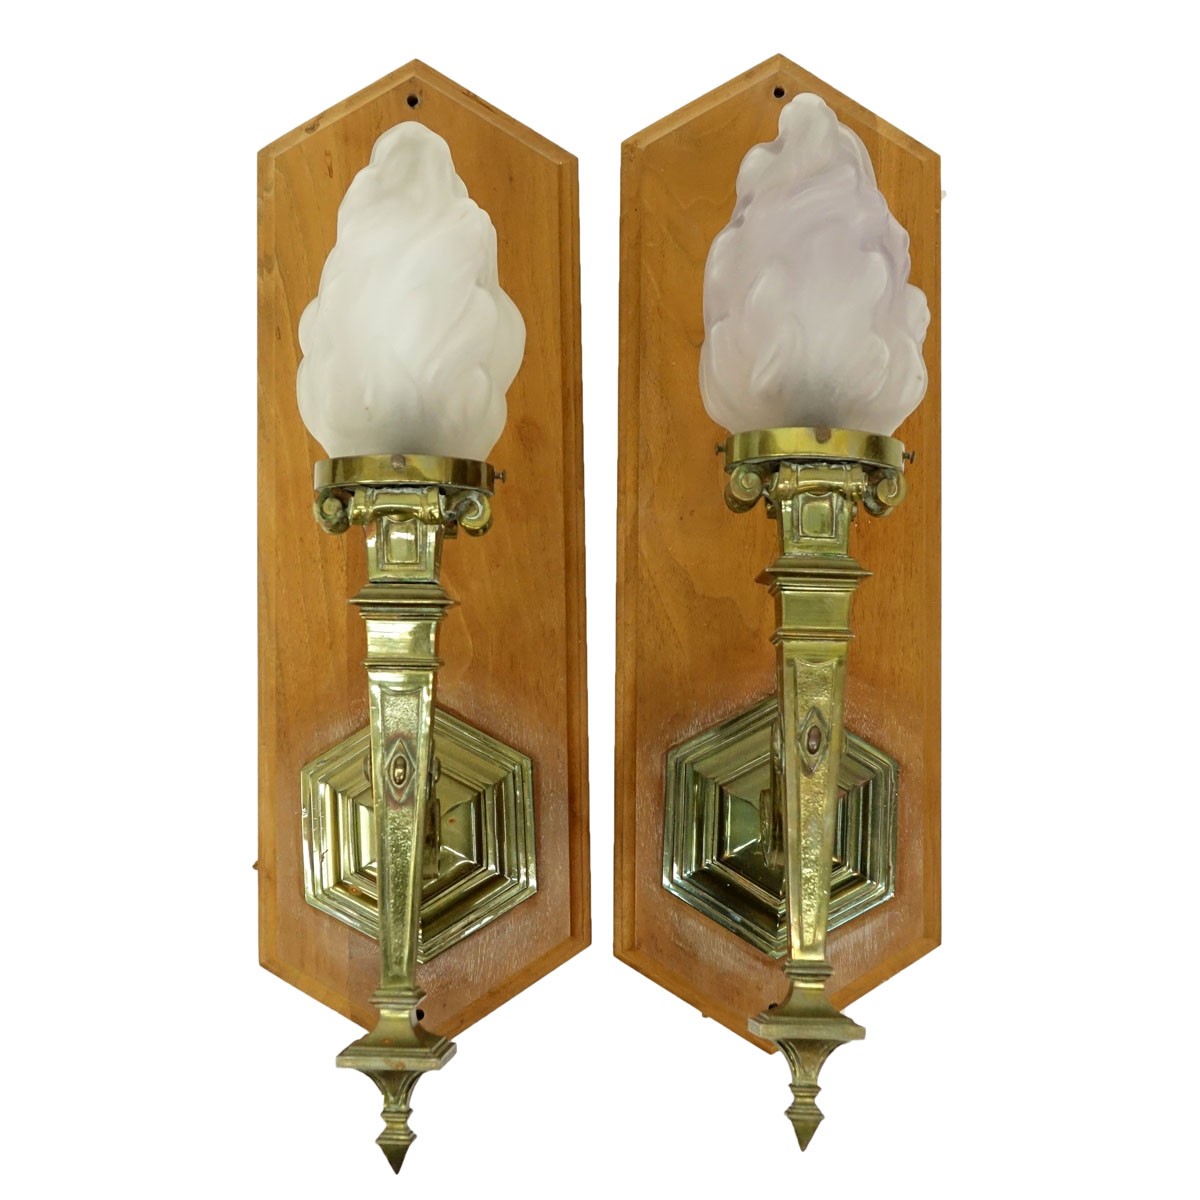 Pair of Bronze Wall Sconces with Frosted Glass Shade, Mounted on Wood Backing. Spotting and rubbing to surface.